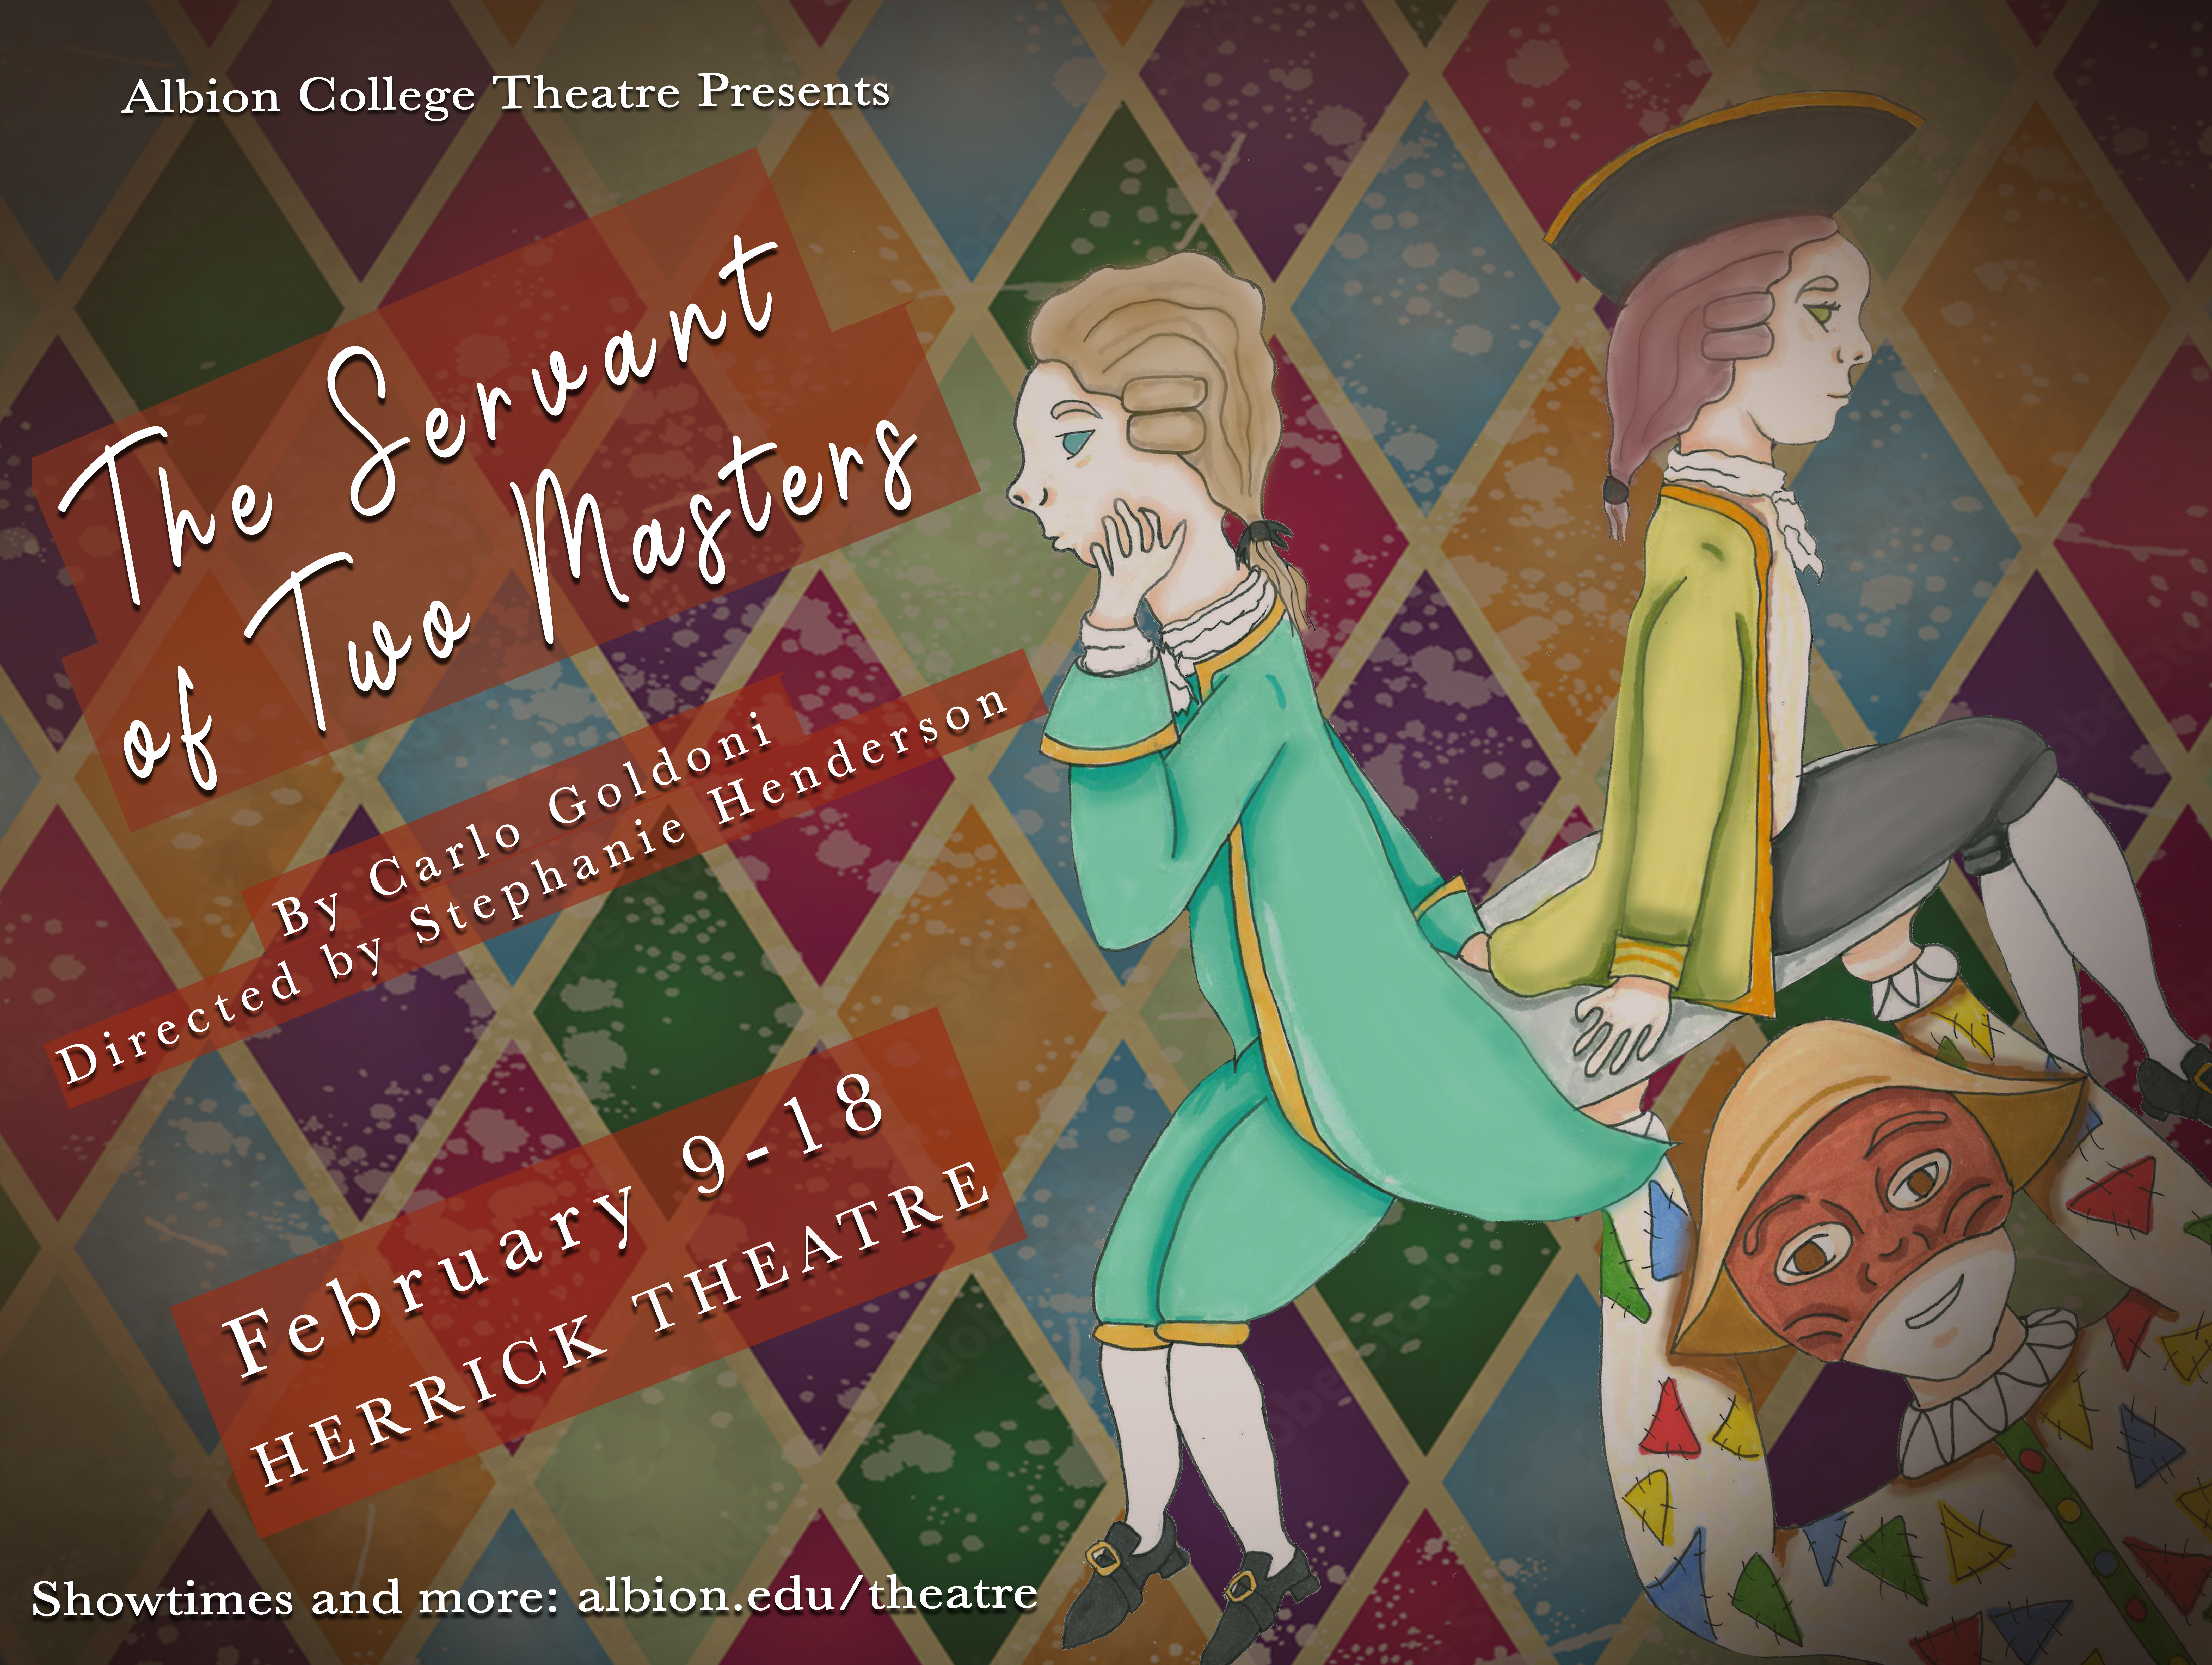 The Servant of Two Masters, by Carlo Goldoni, directed by Stephanie Henderson. February 9 to 18, Herrick Theatre.